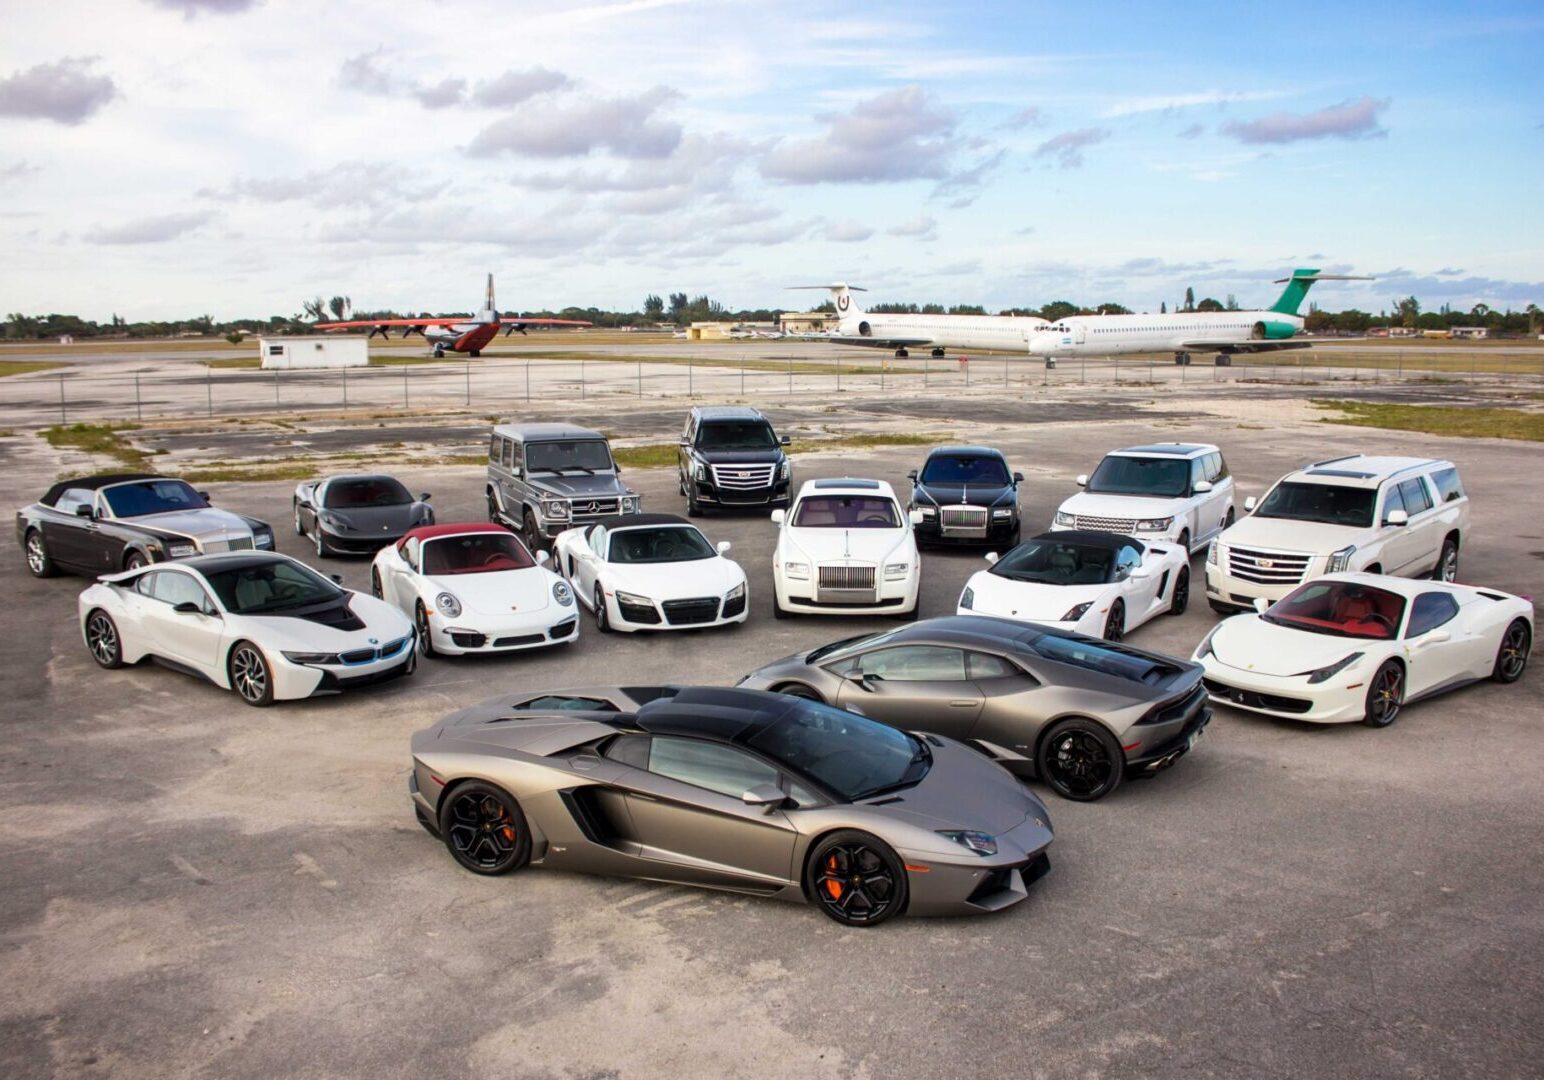 A group of cars parked in a parking lot.